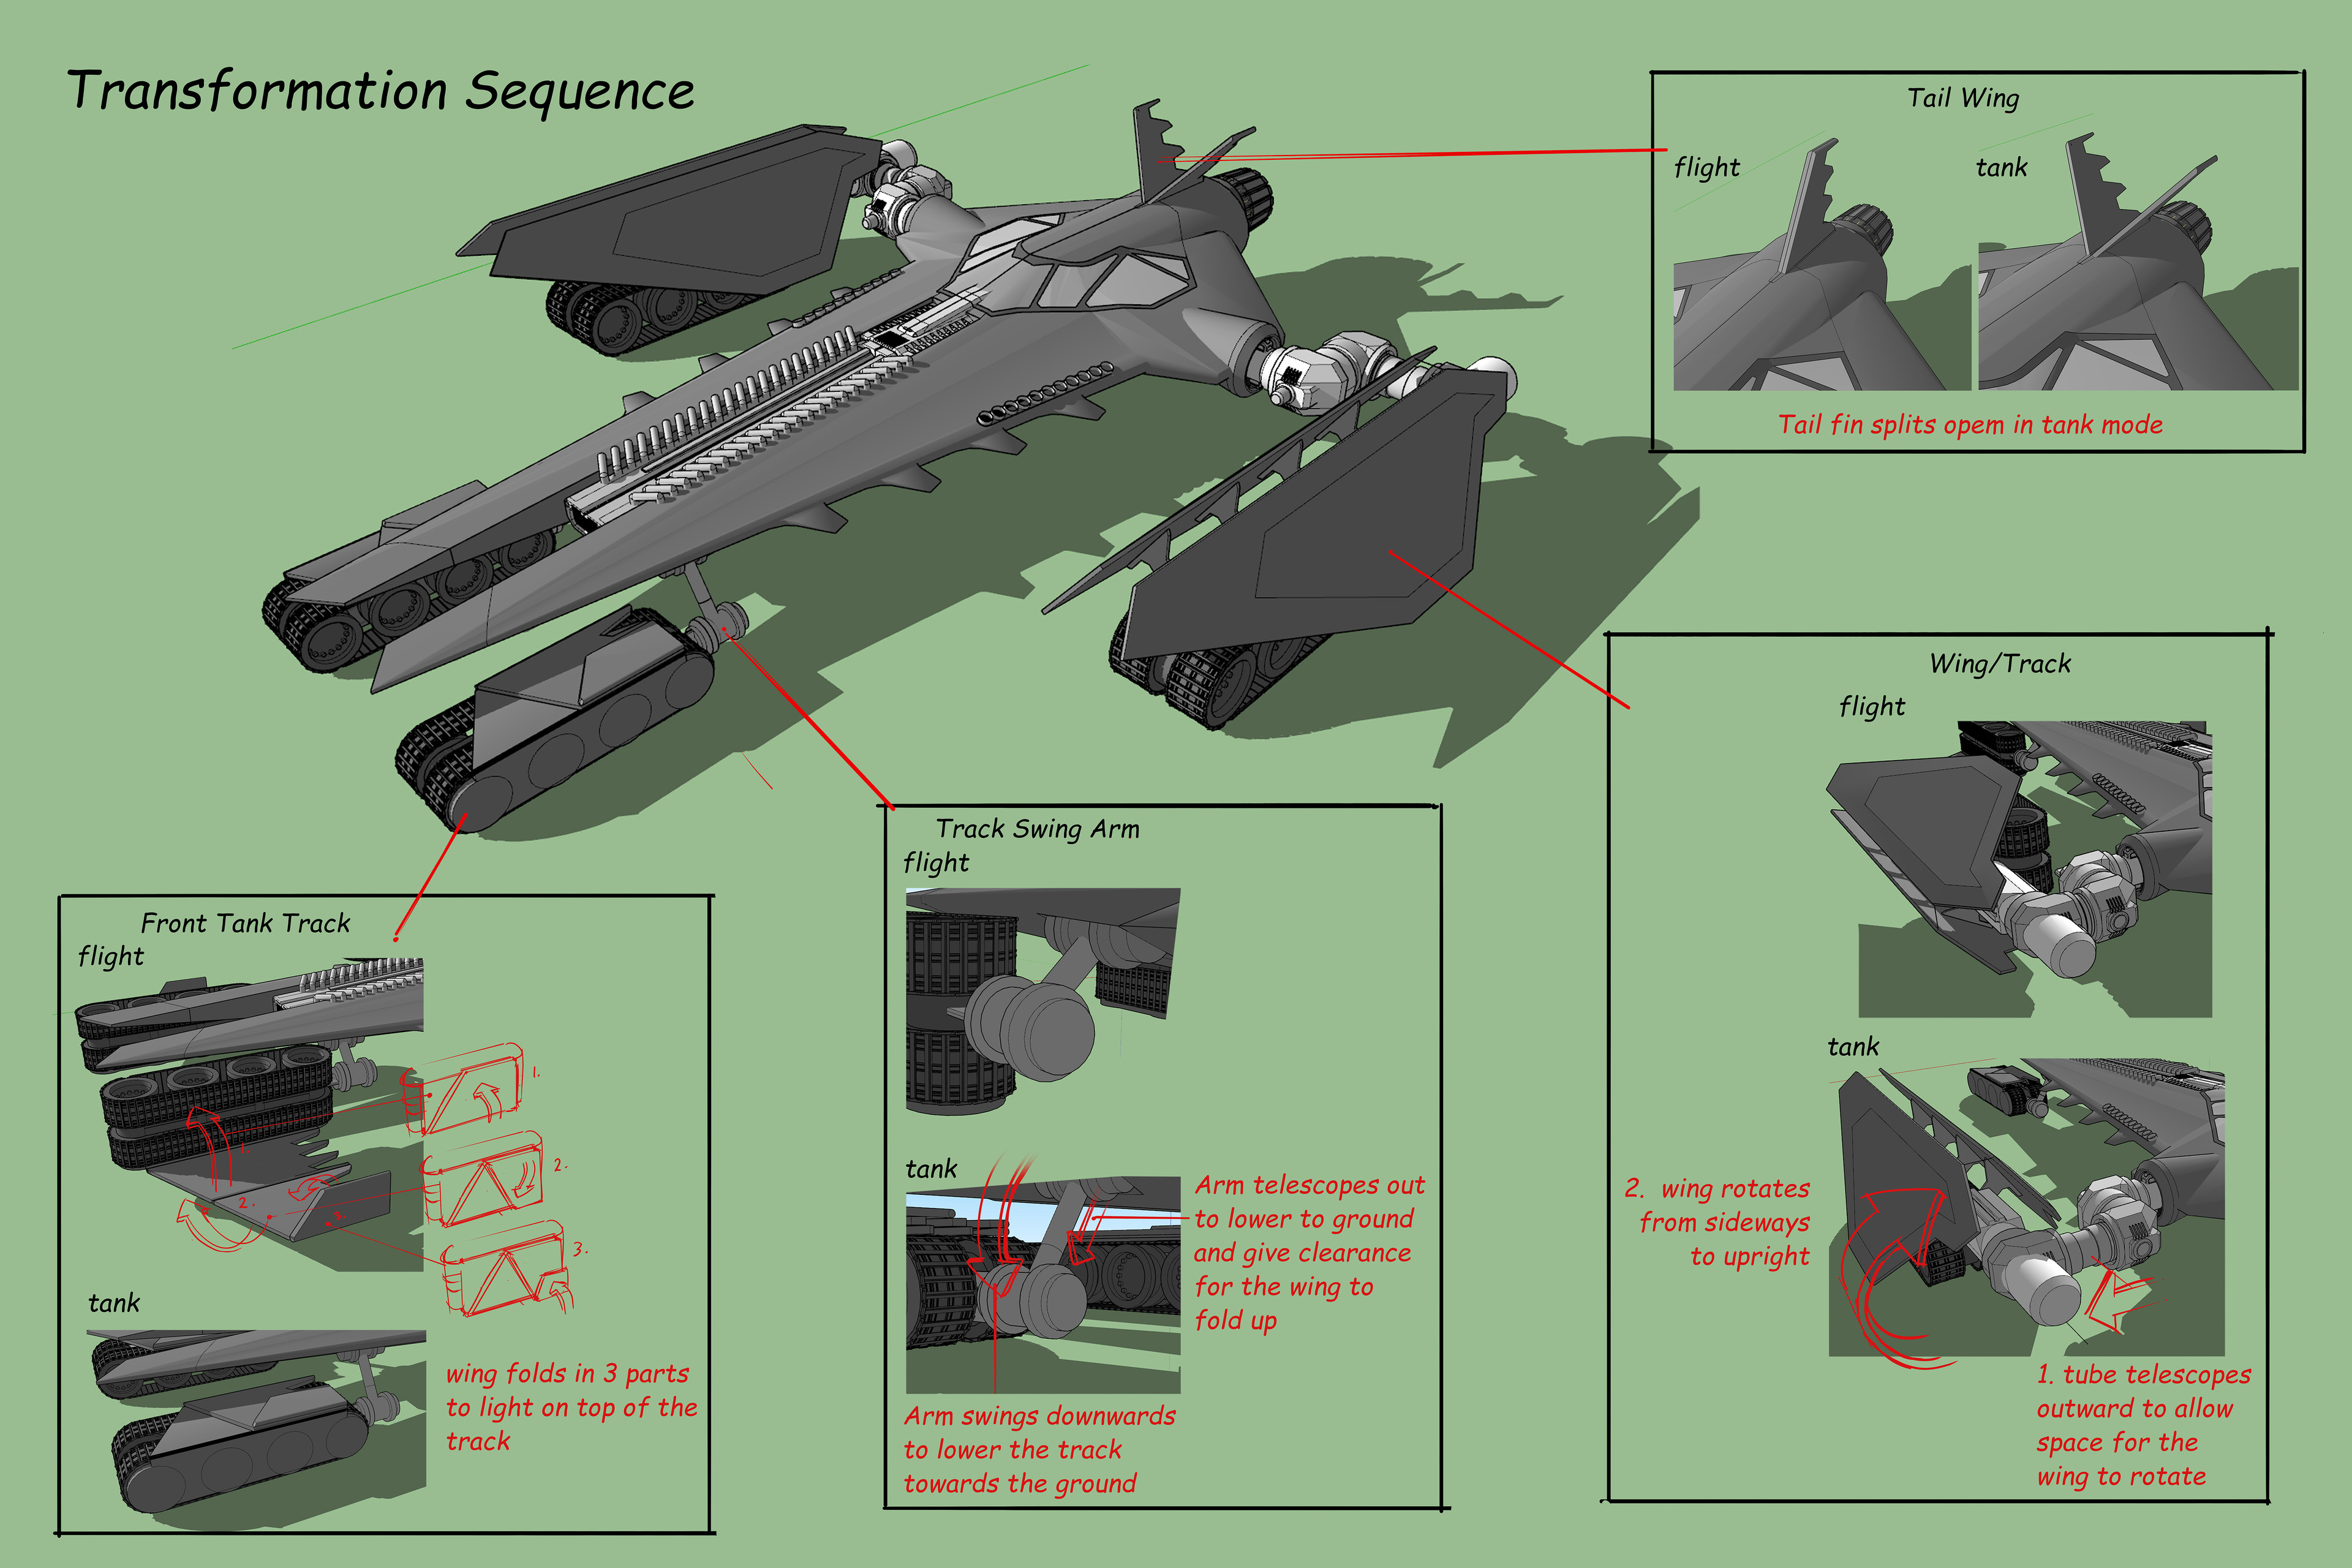 Batwing to Bat Tank transformation toy design: Transformation sequence